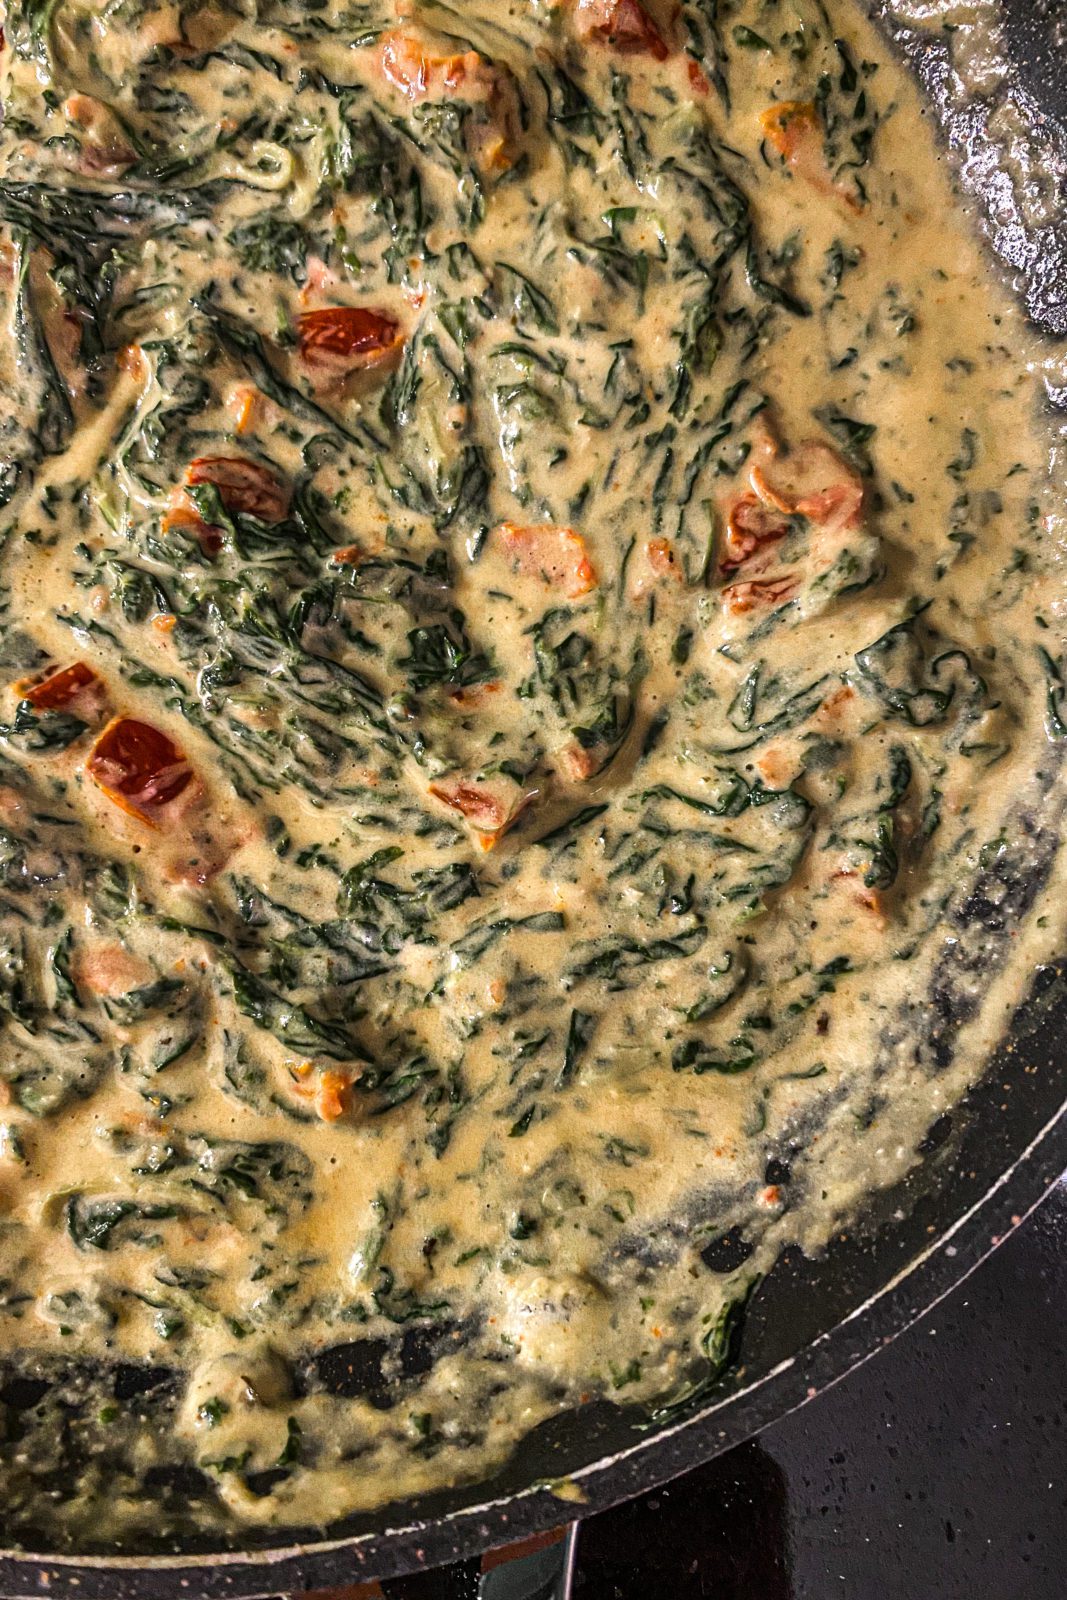 Smoky Vegan Mac and Cheese with sun dried tomatoes and spinach